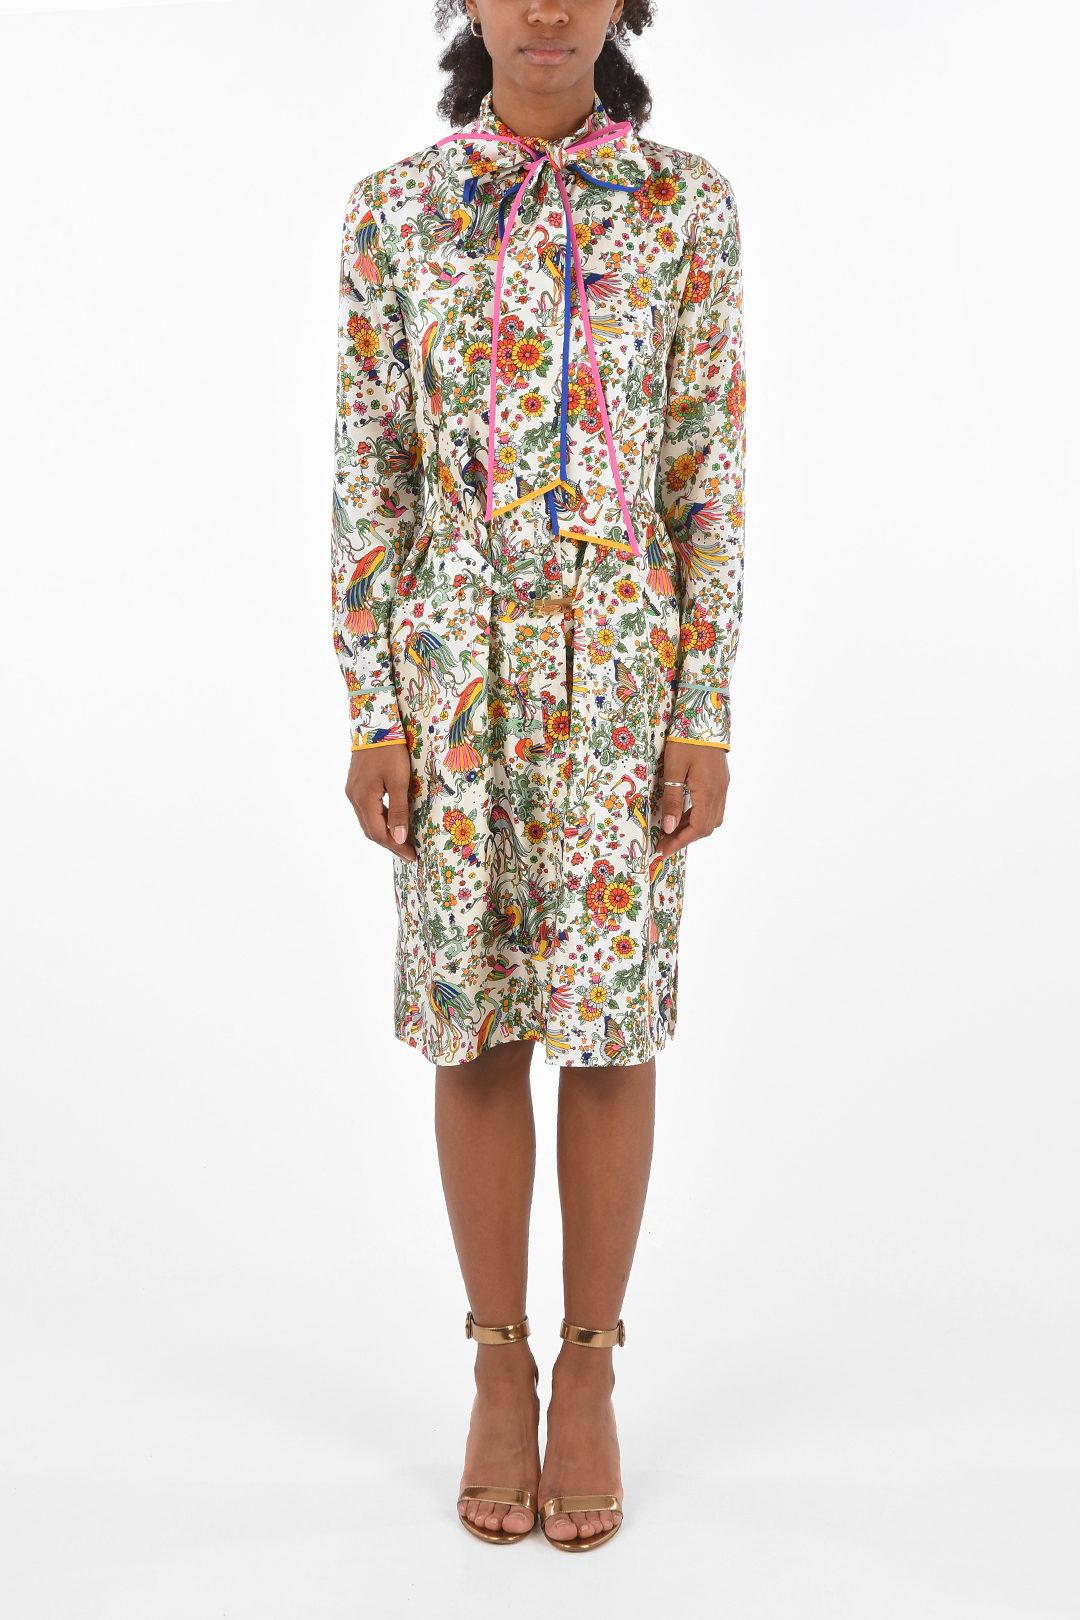 Tory Burch floral-print silk knee lenght shirtdress with tie neck women ...